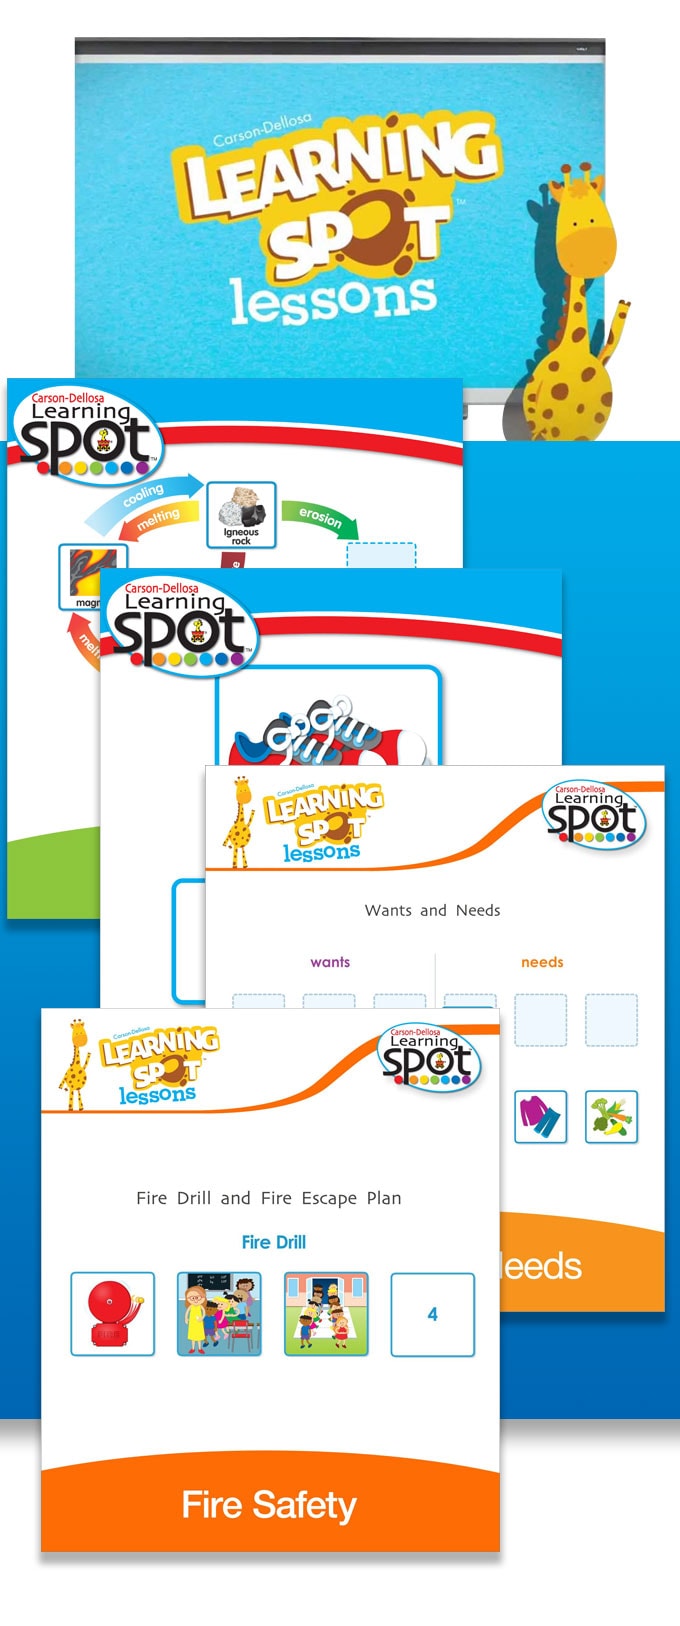 Learning spot lessons project